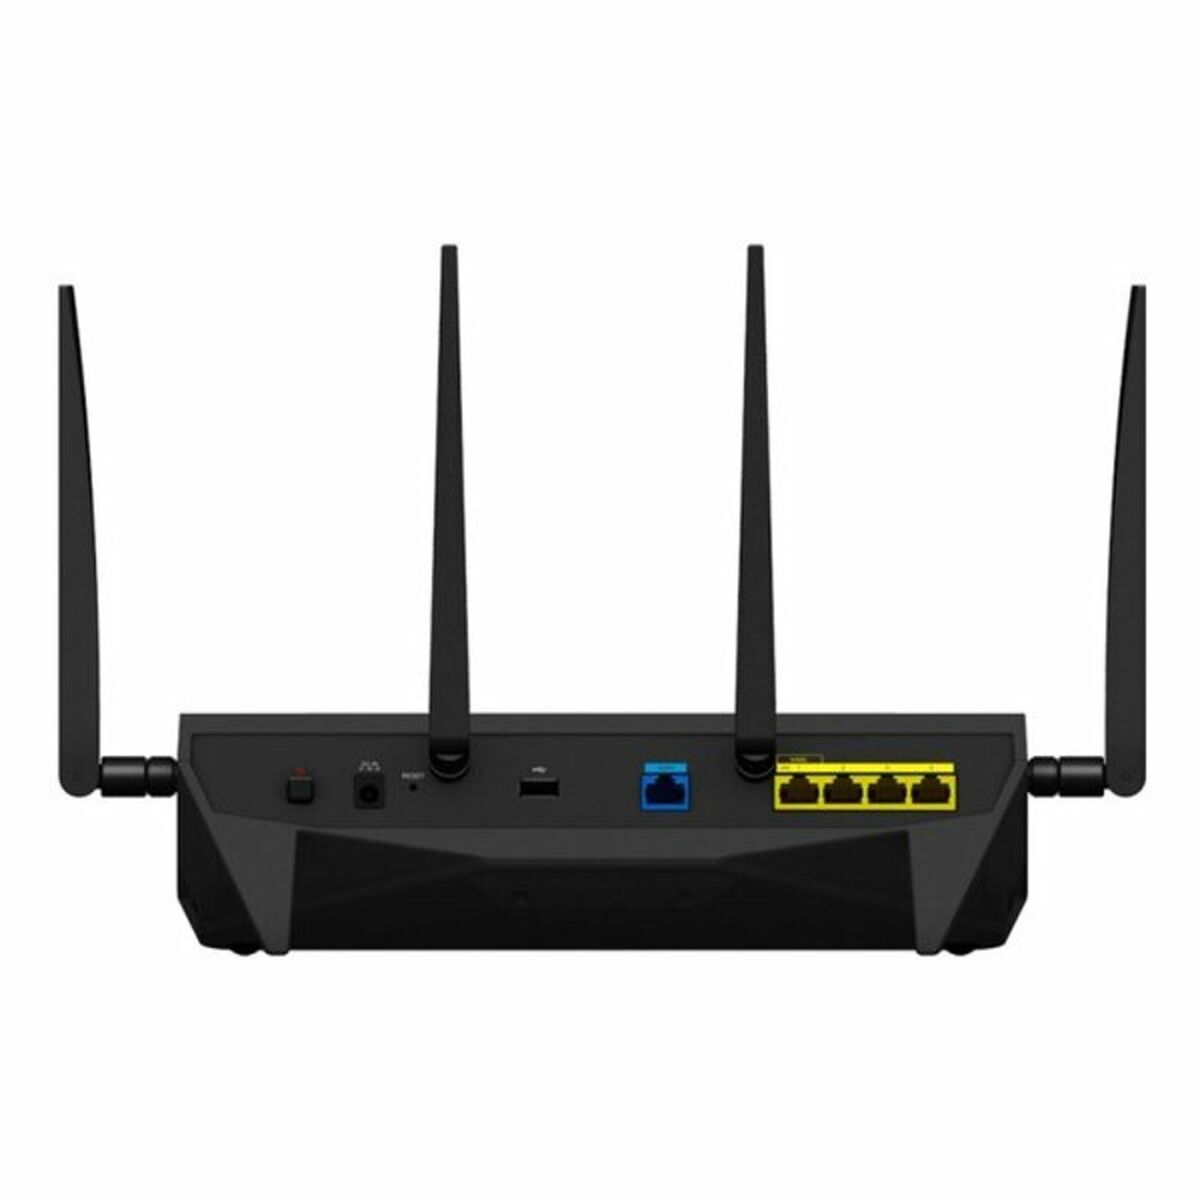 Router Synology RT2600ac Wifi 800-1733 Mbps 2,4-5 Ghz